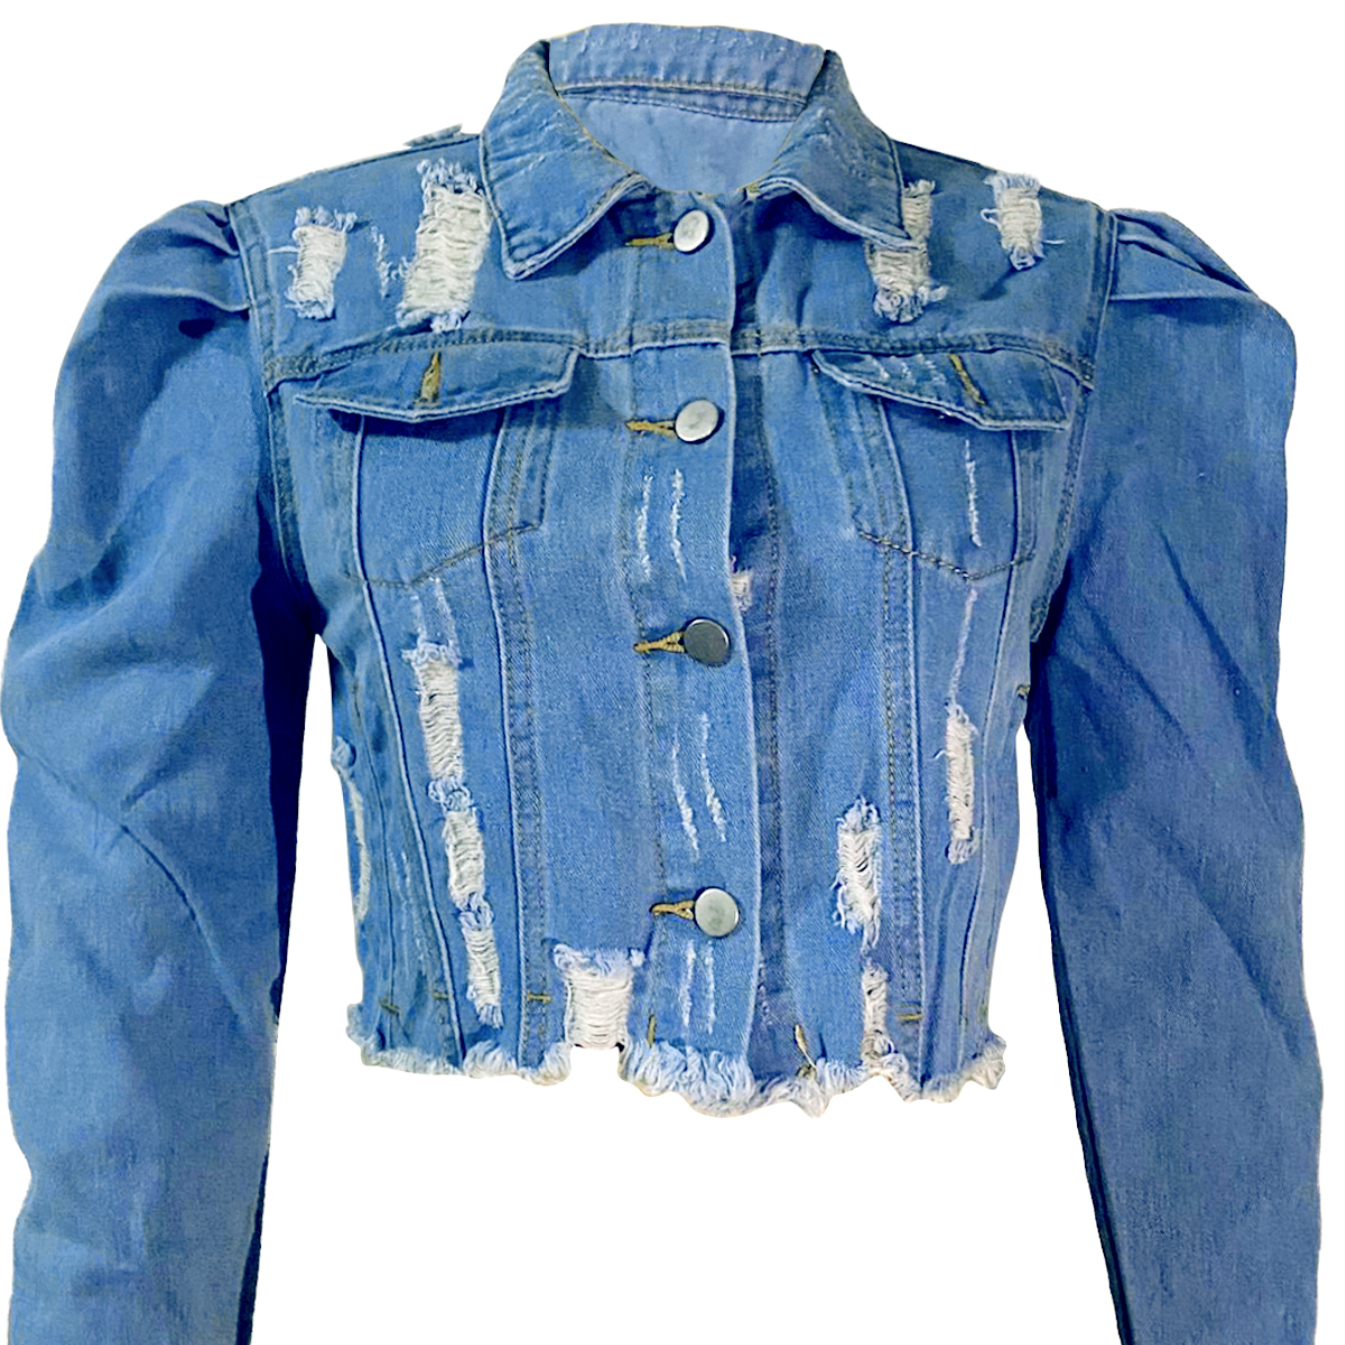 PEIQI Women’s Cropped Jean Denim Jacket Button Down Long Sleeve with Pockets